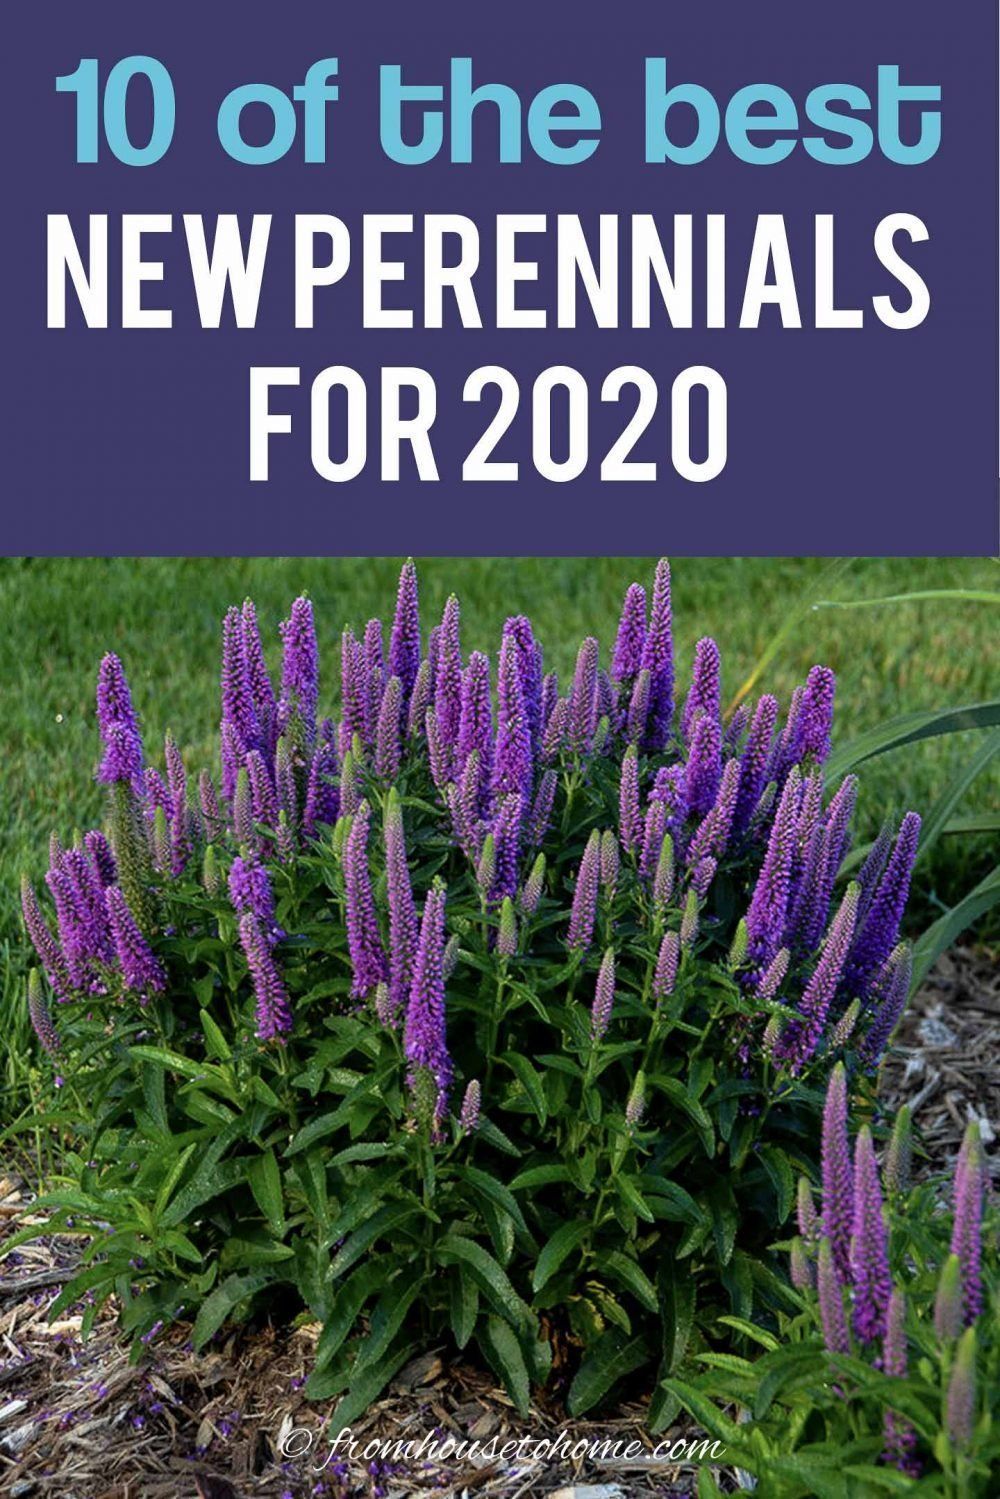 New 2020 Perennials (10 of the Best New Perennials For 2020) - Gardening @ From House To Home -   beauty Flowers garden